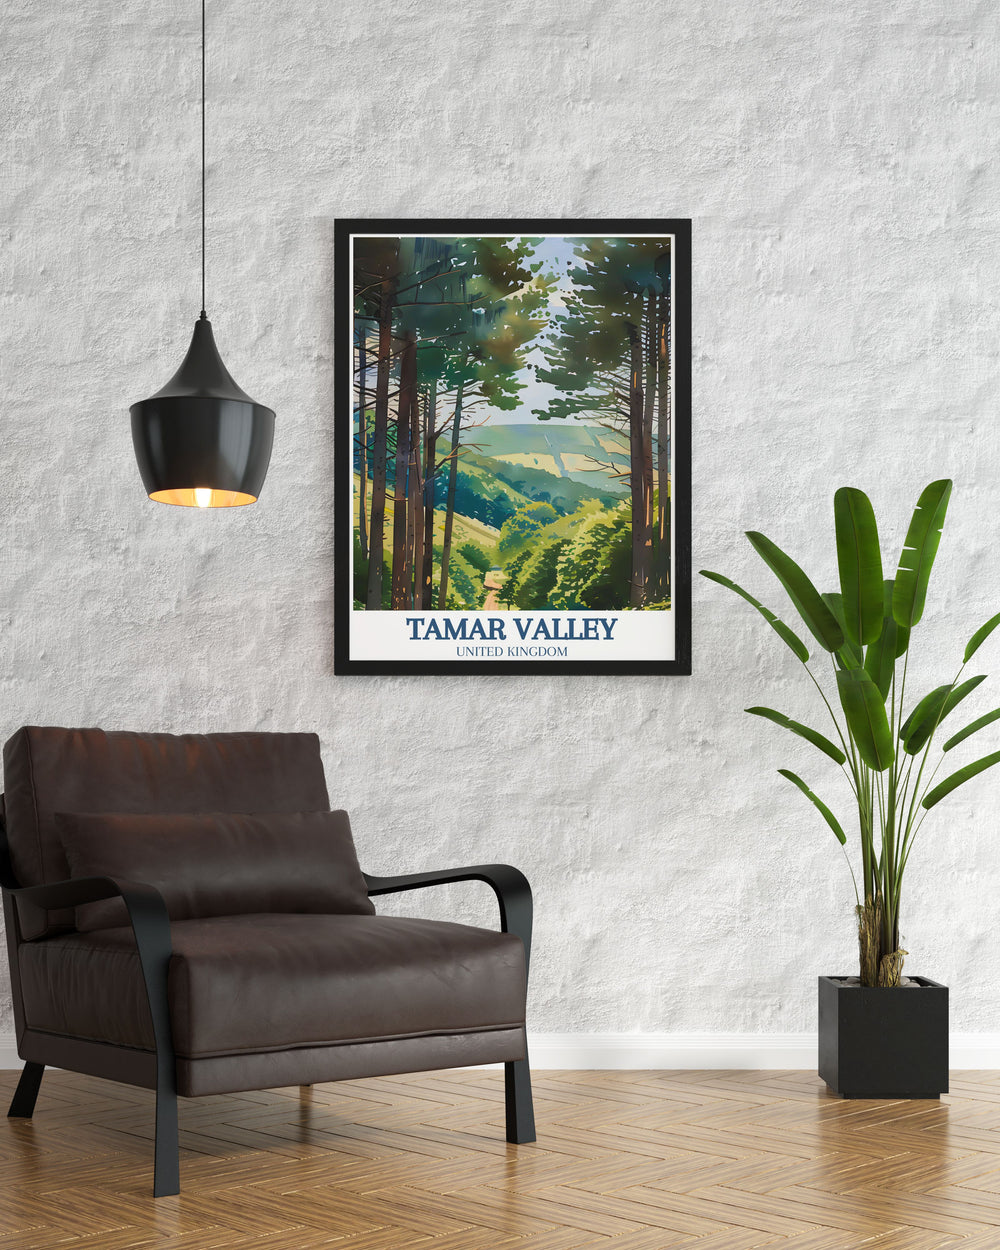 Enhance your living room with the elegant home decor of Tamar Trails and Kit Hill. This framed print captures the vibrant colors and intricate details of Cornwall and Devons iconic landscapes, making it a captivating addition to your wall art collection.